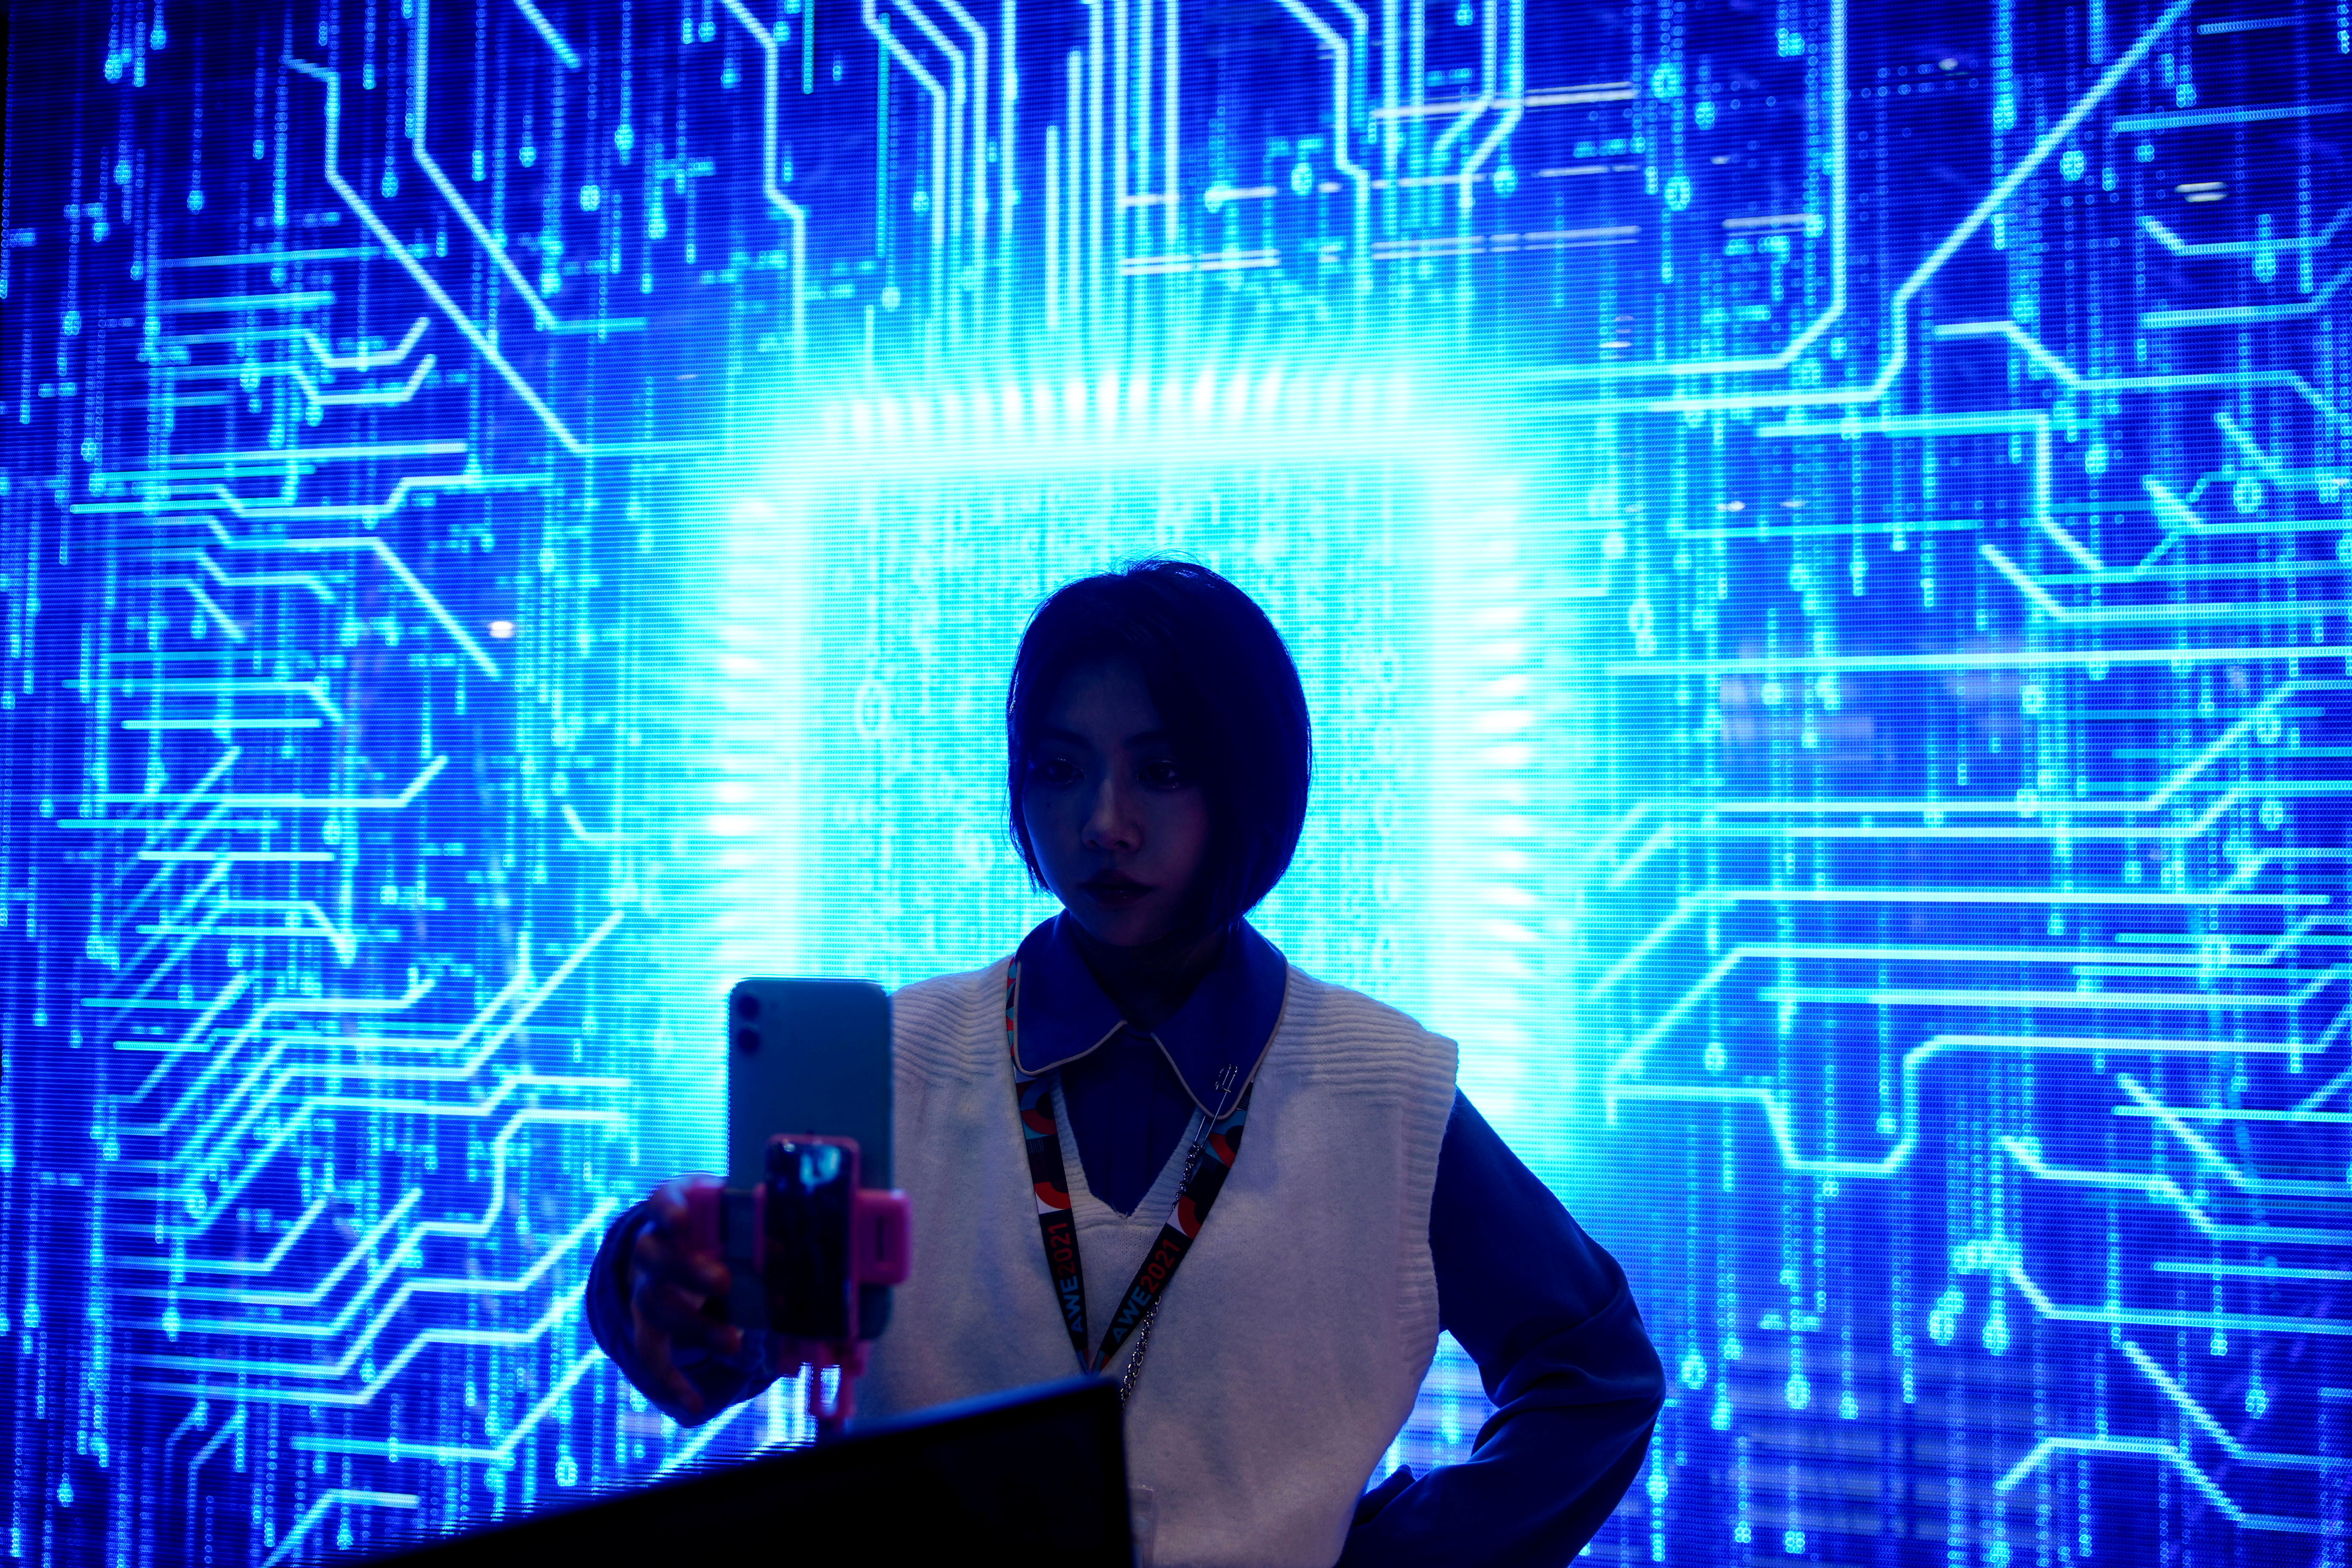 A woman visits a semiconductor device display at the Appliance and Electronics World Expo (AWE) in Shanghai, China March 23, 2021. REUTERS/Aly Song